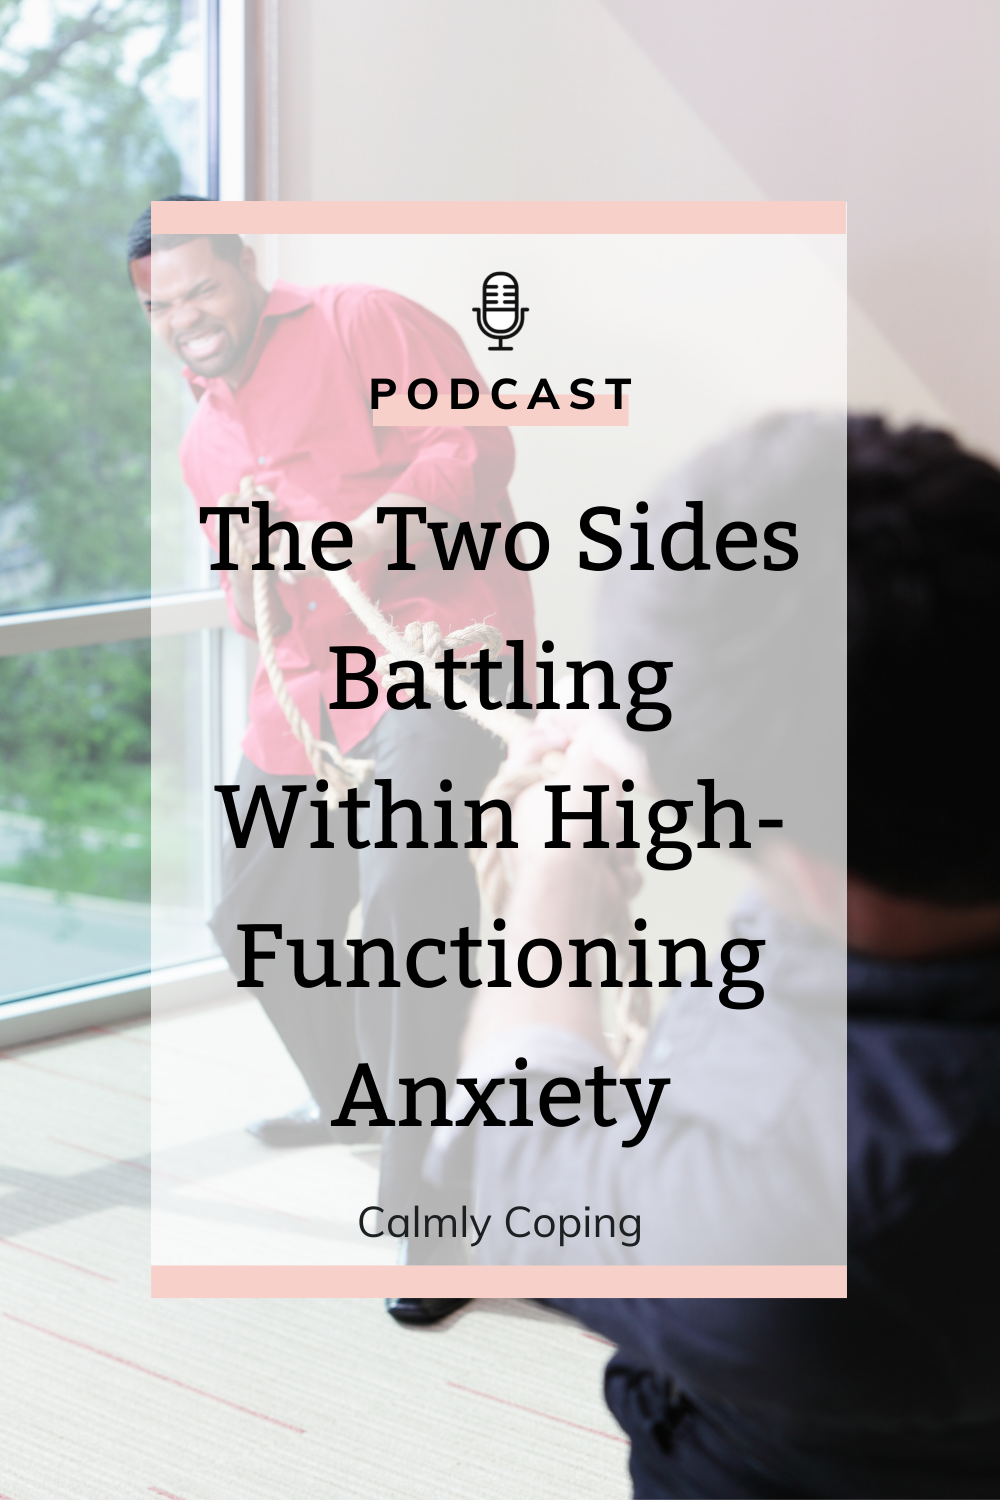 The Two Sides Battling Within High-Functioning Anxiety